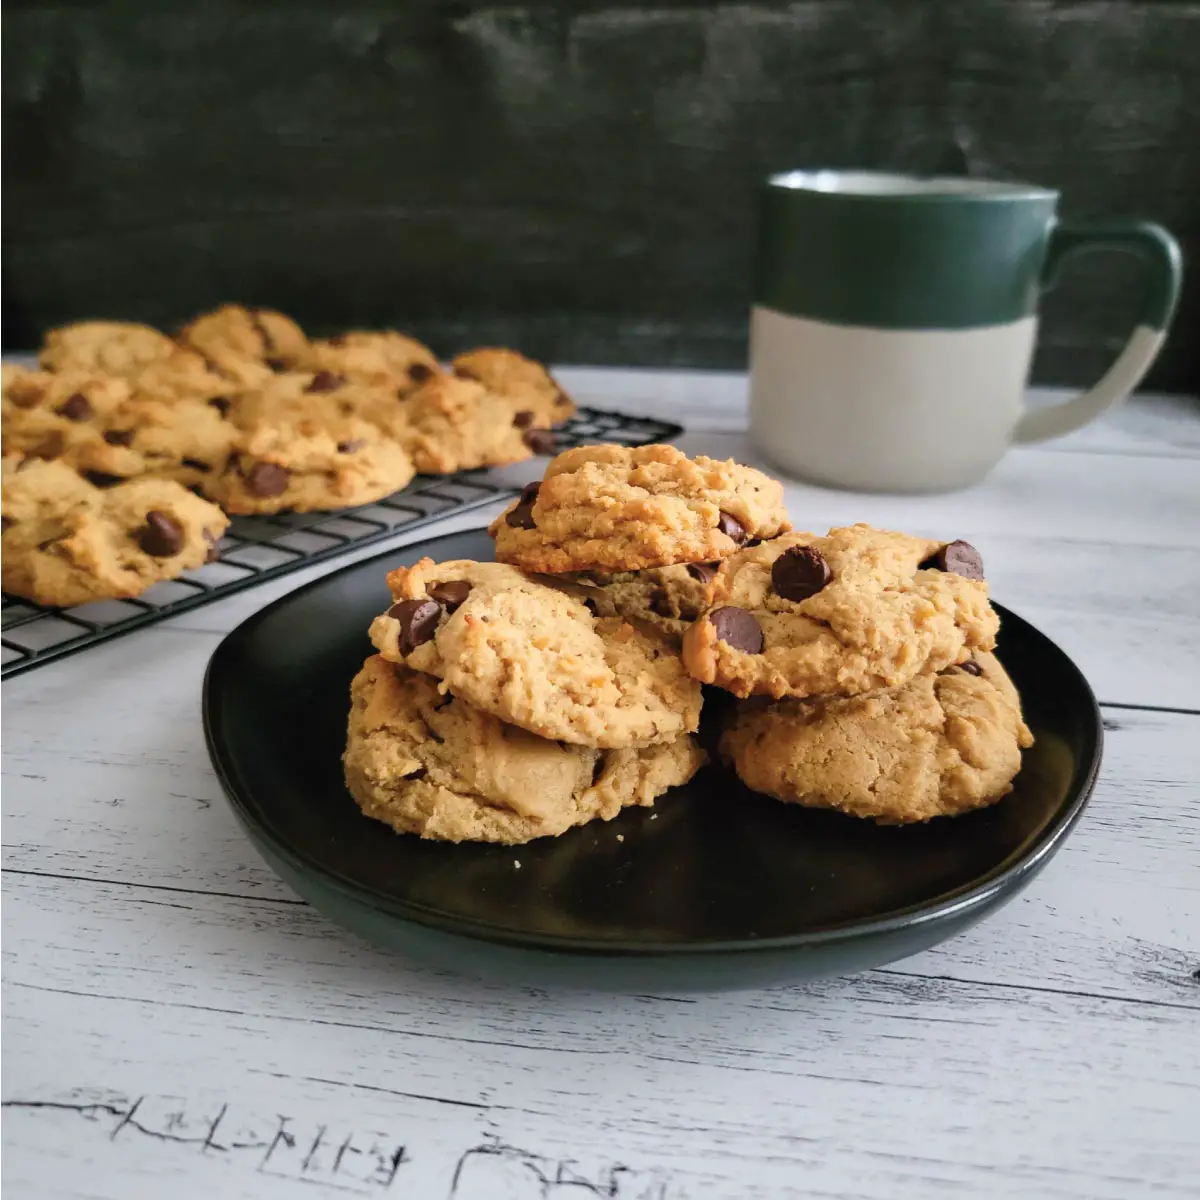 Cookies on a small plate and some on a cooling rack with a cup of coffee by the cookies.